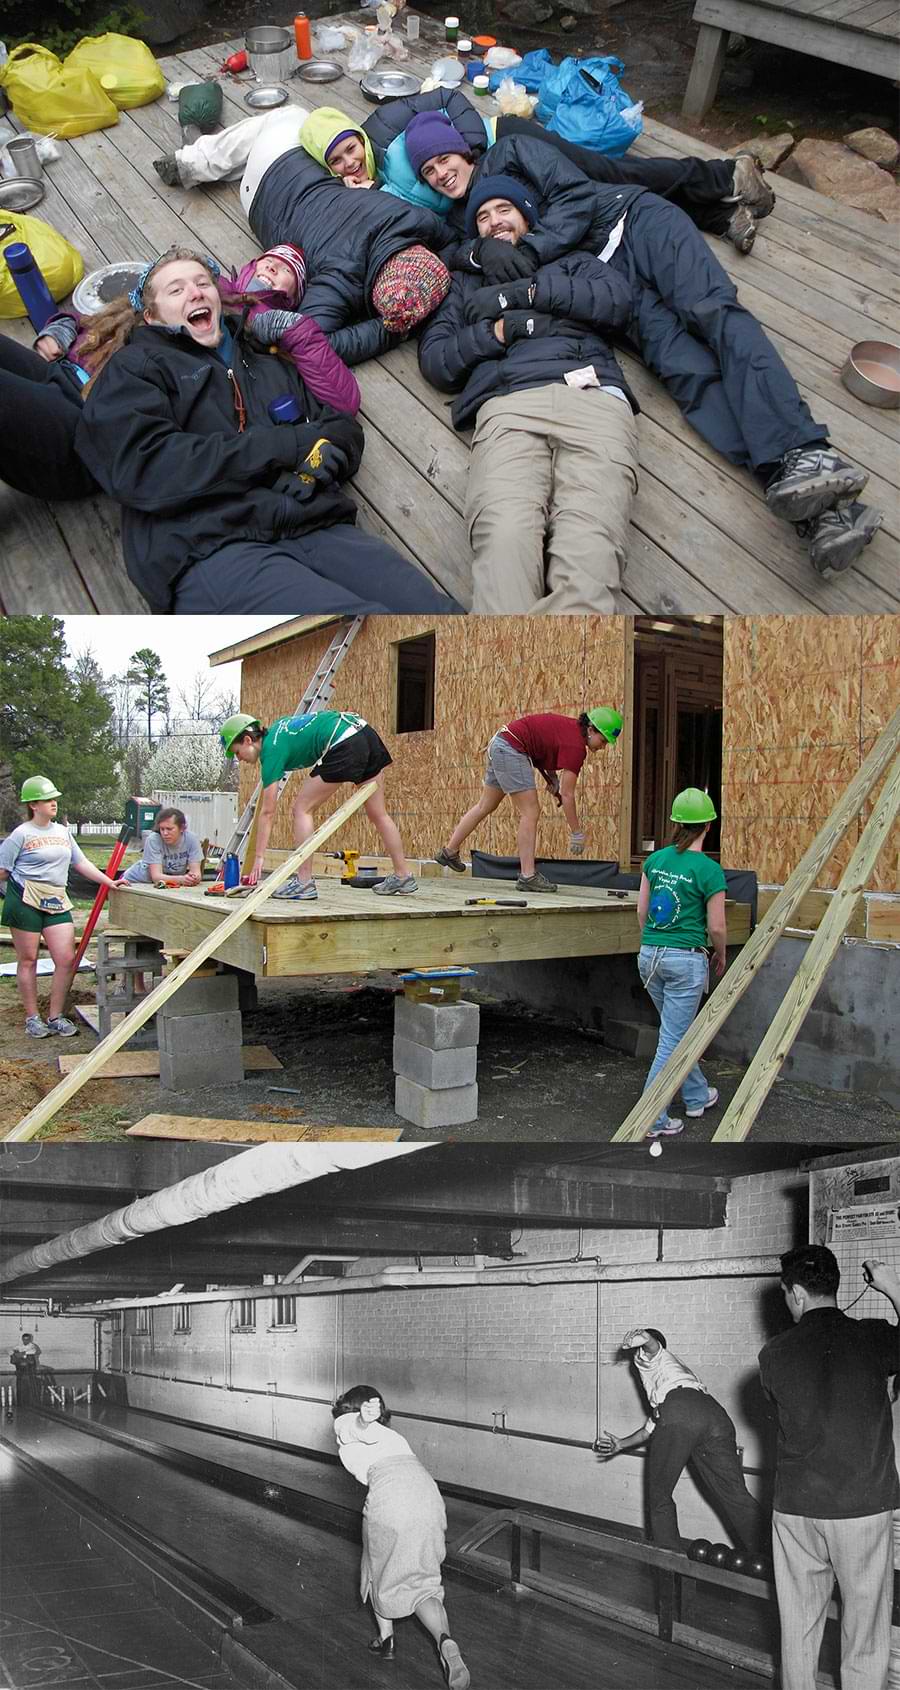 Plymouth Students camping, building a house and bowling